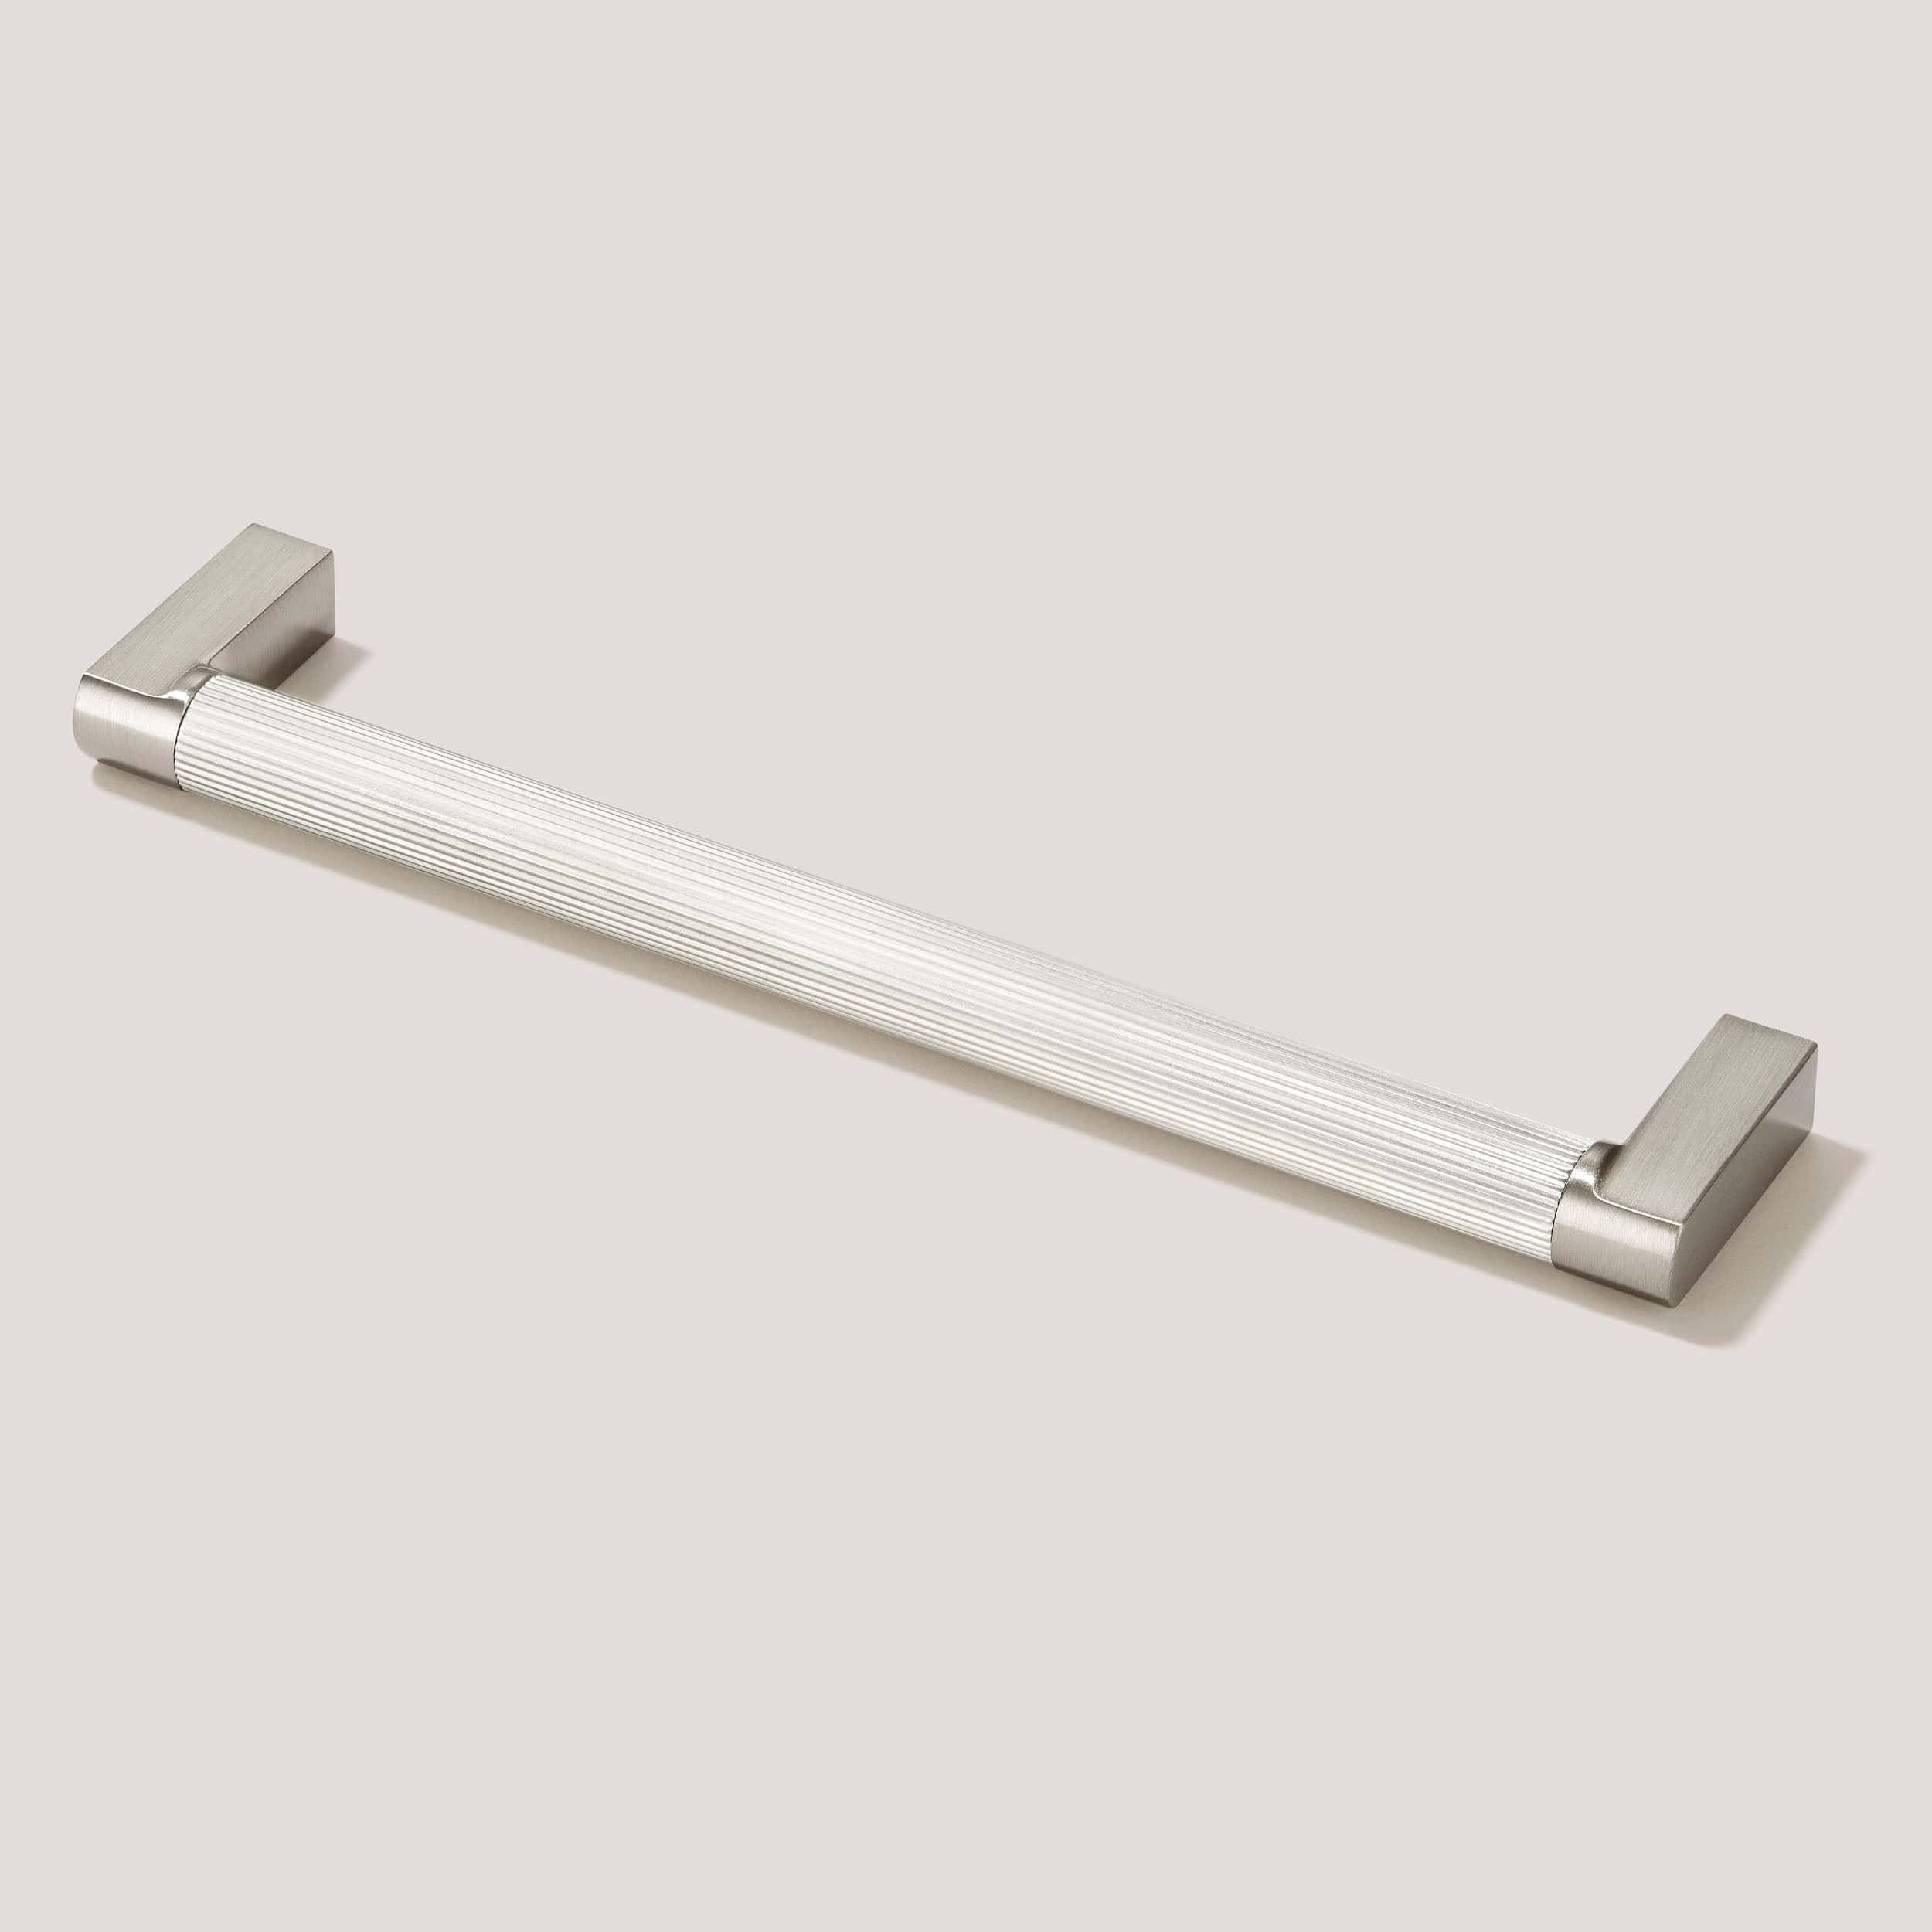 Plank Hardware Handles & Knobs BECKER Grooved D-Bar Handle - Stainless Steel